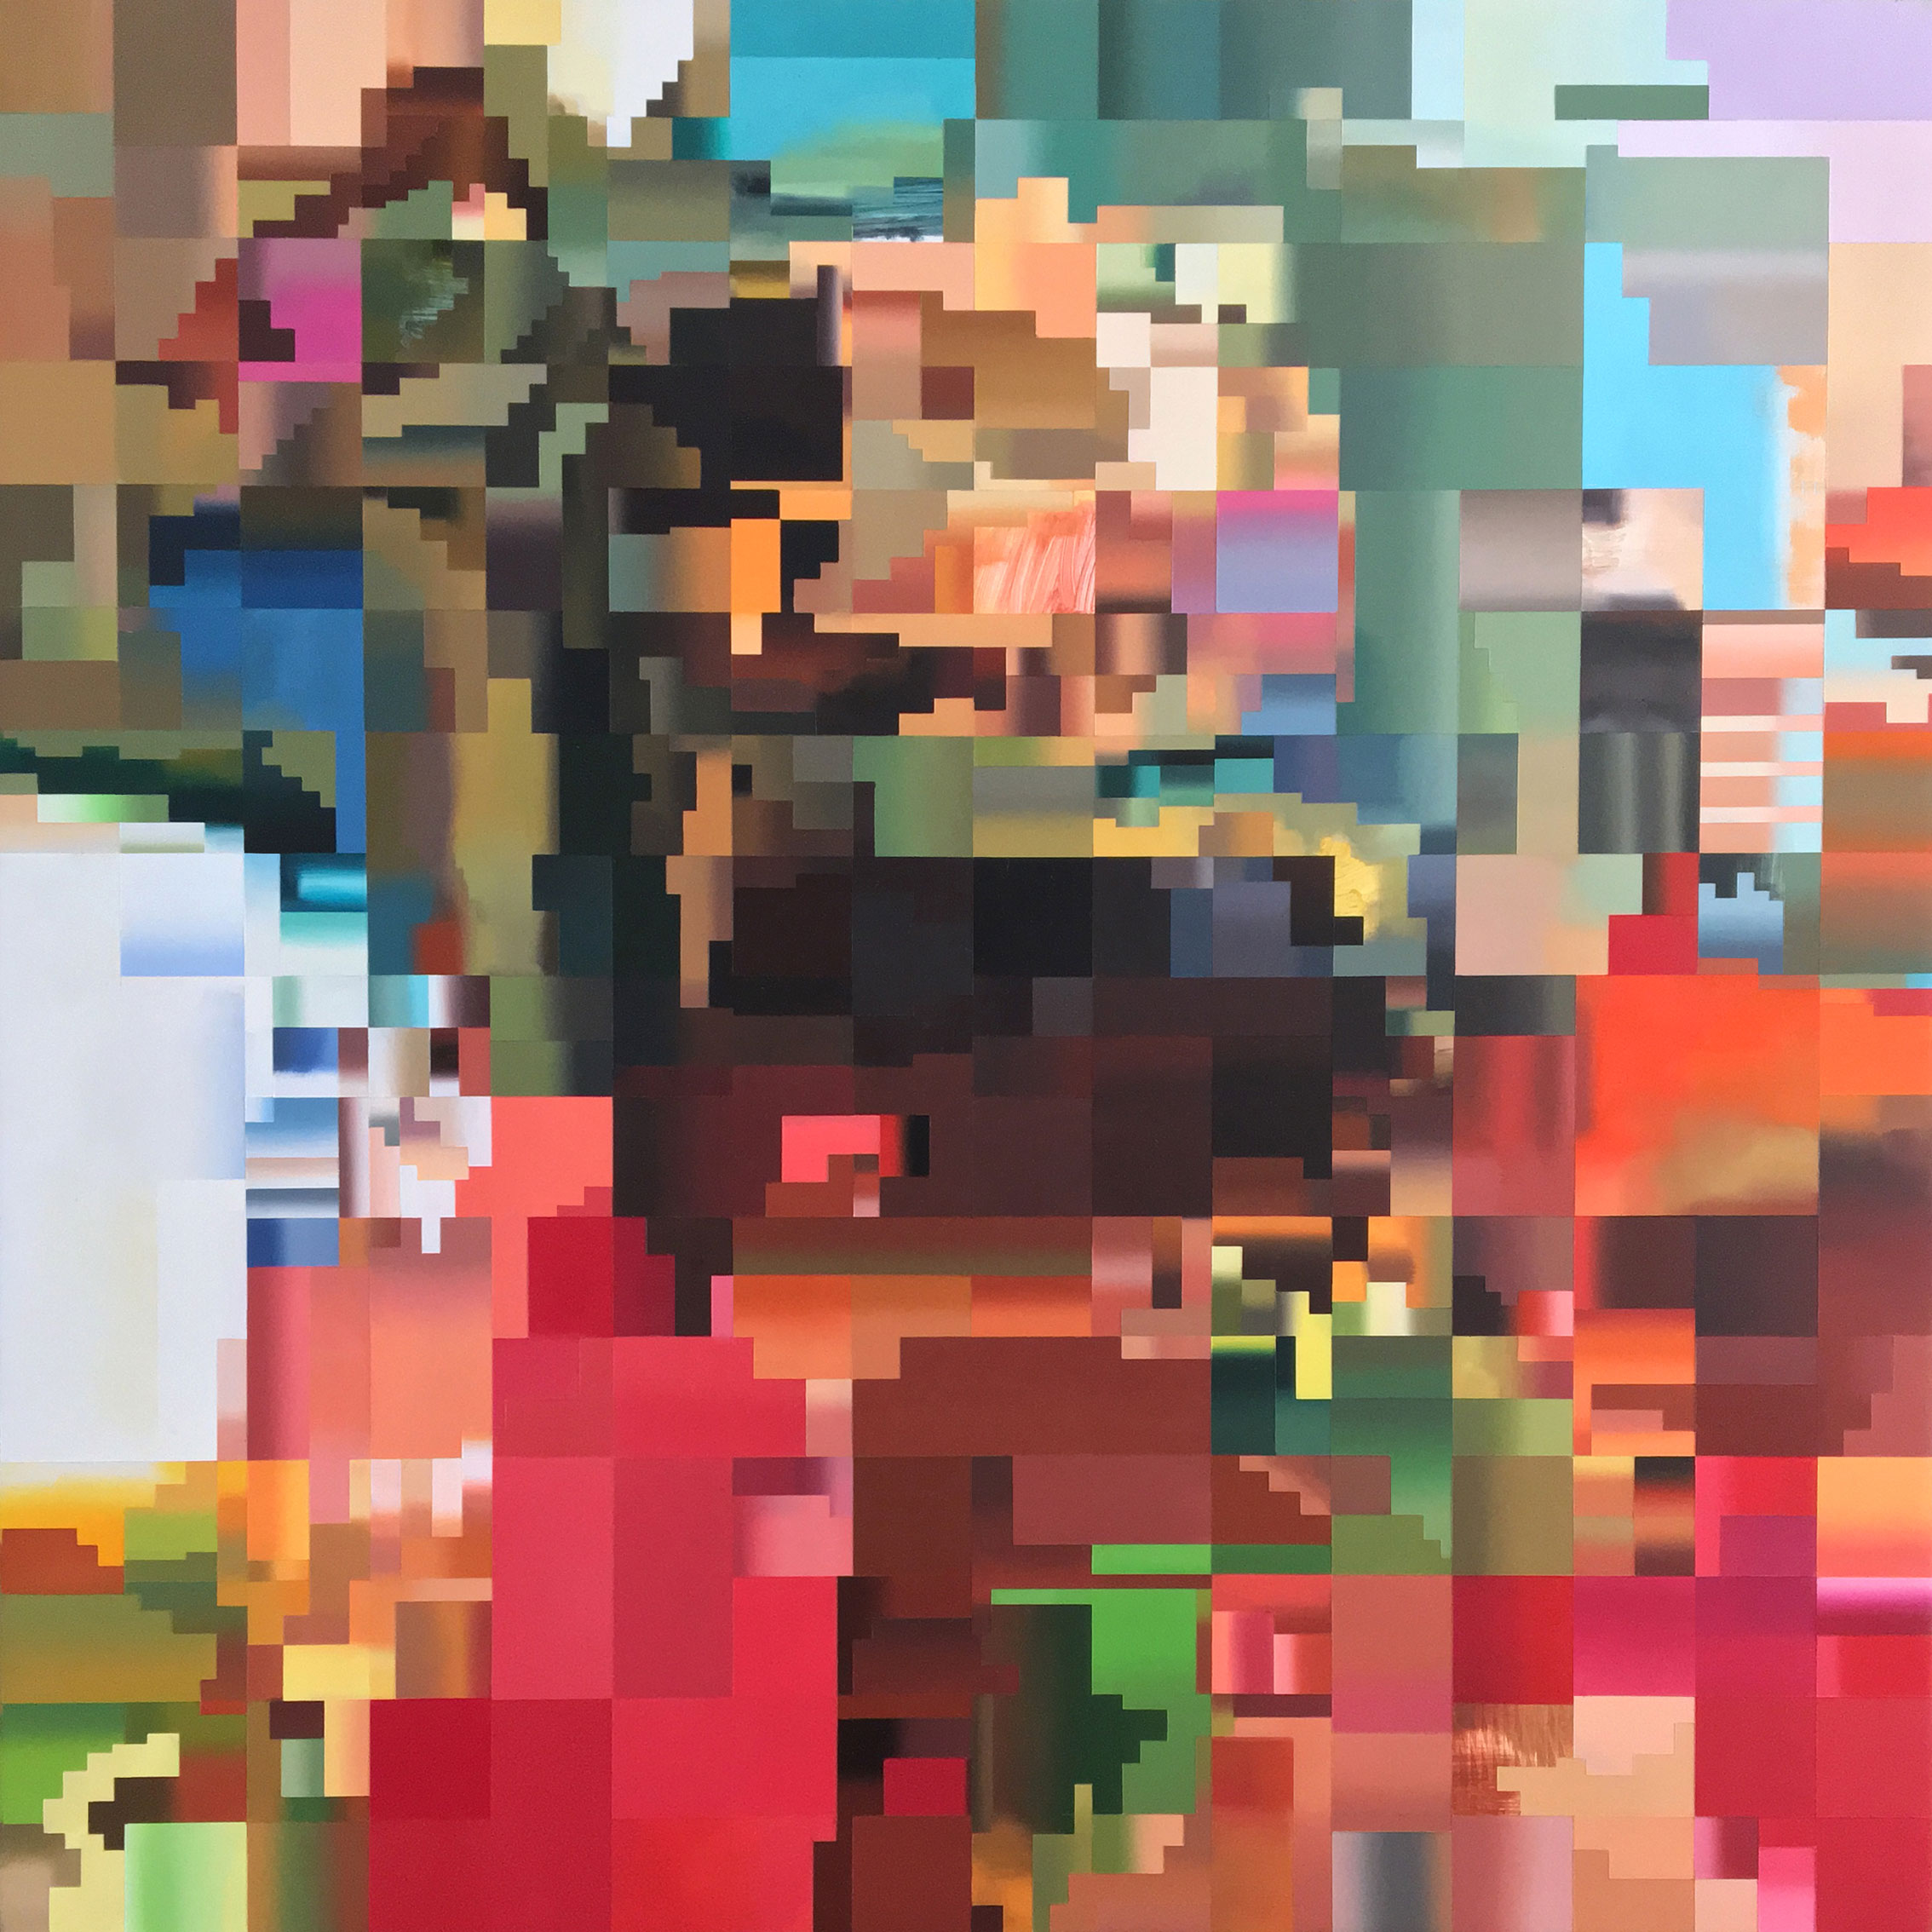 Oil painting by artist and painter Paul Lemmon in bright colours of blue, red and green depicting a pixelated frame from a glitched digital video